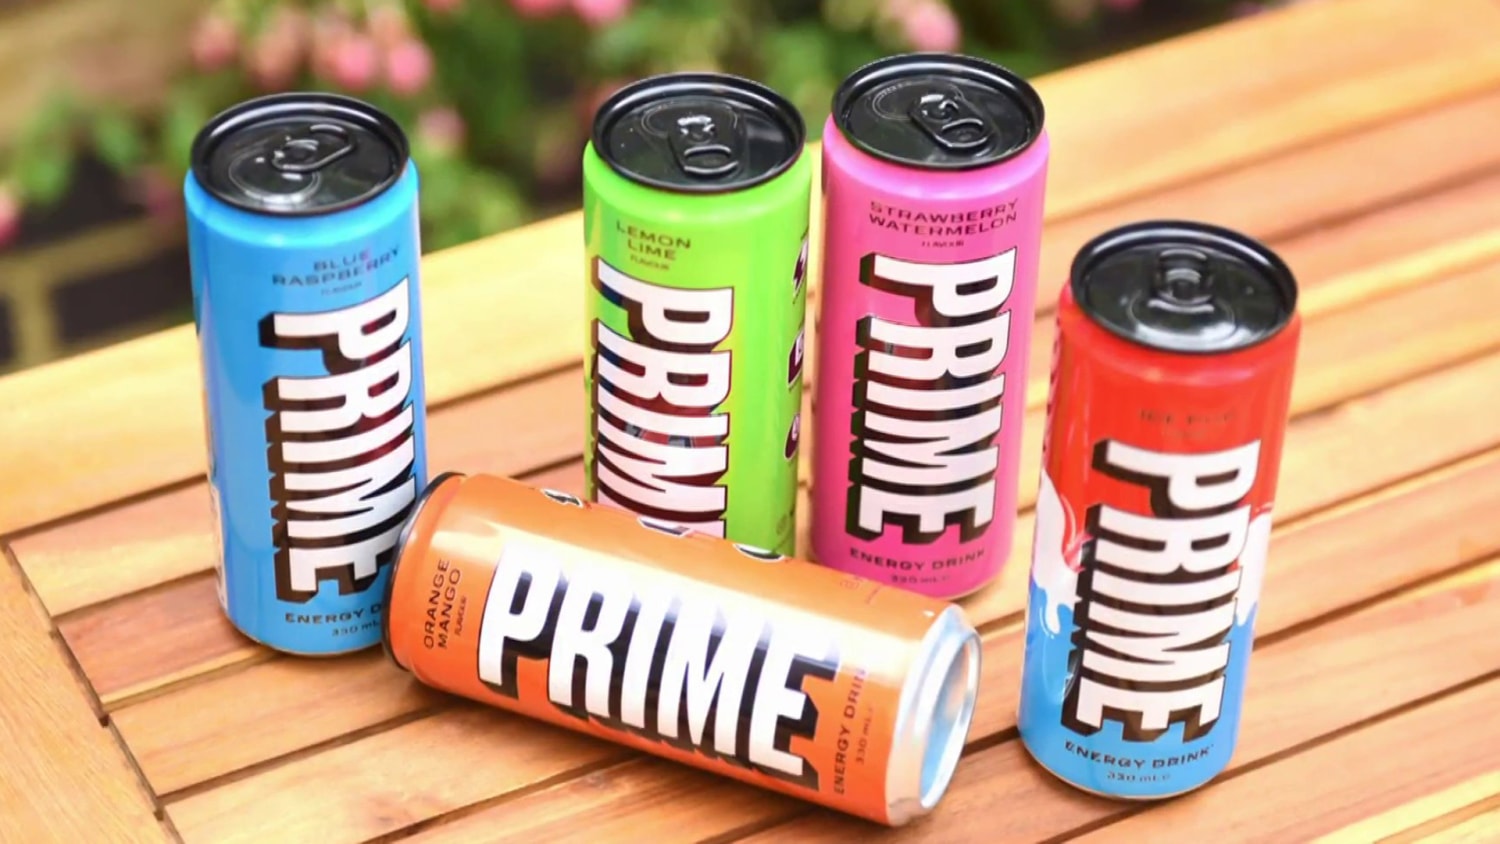 FDA asked to investigate Logan Paul's energy drink, PRIME, which